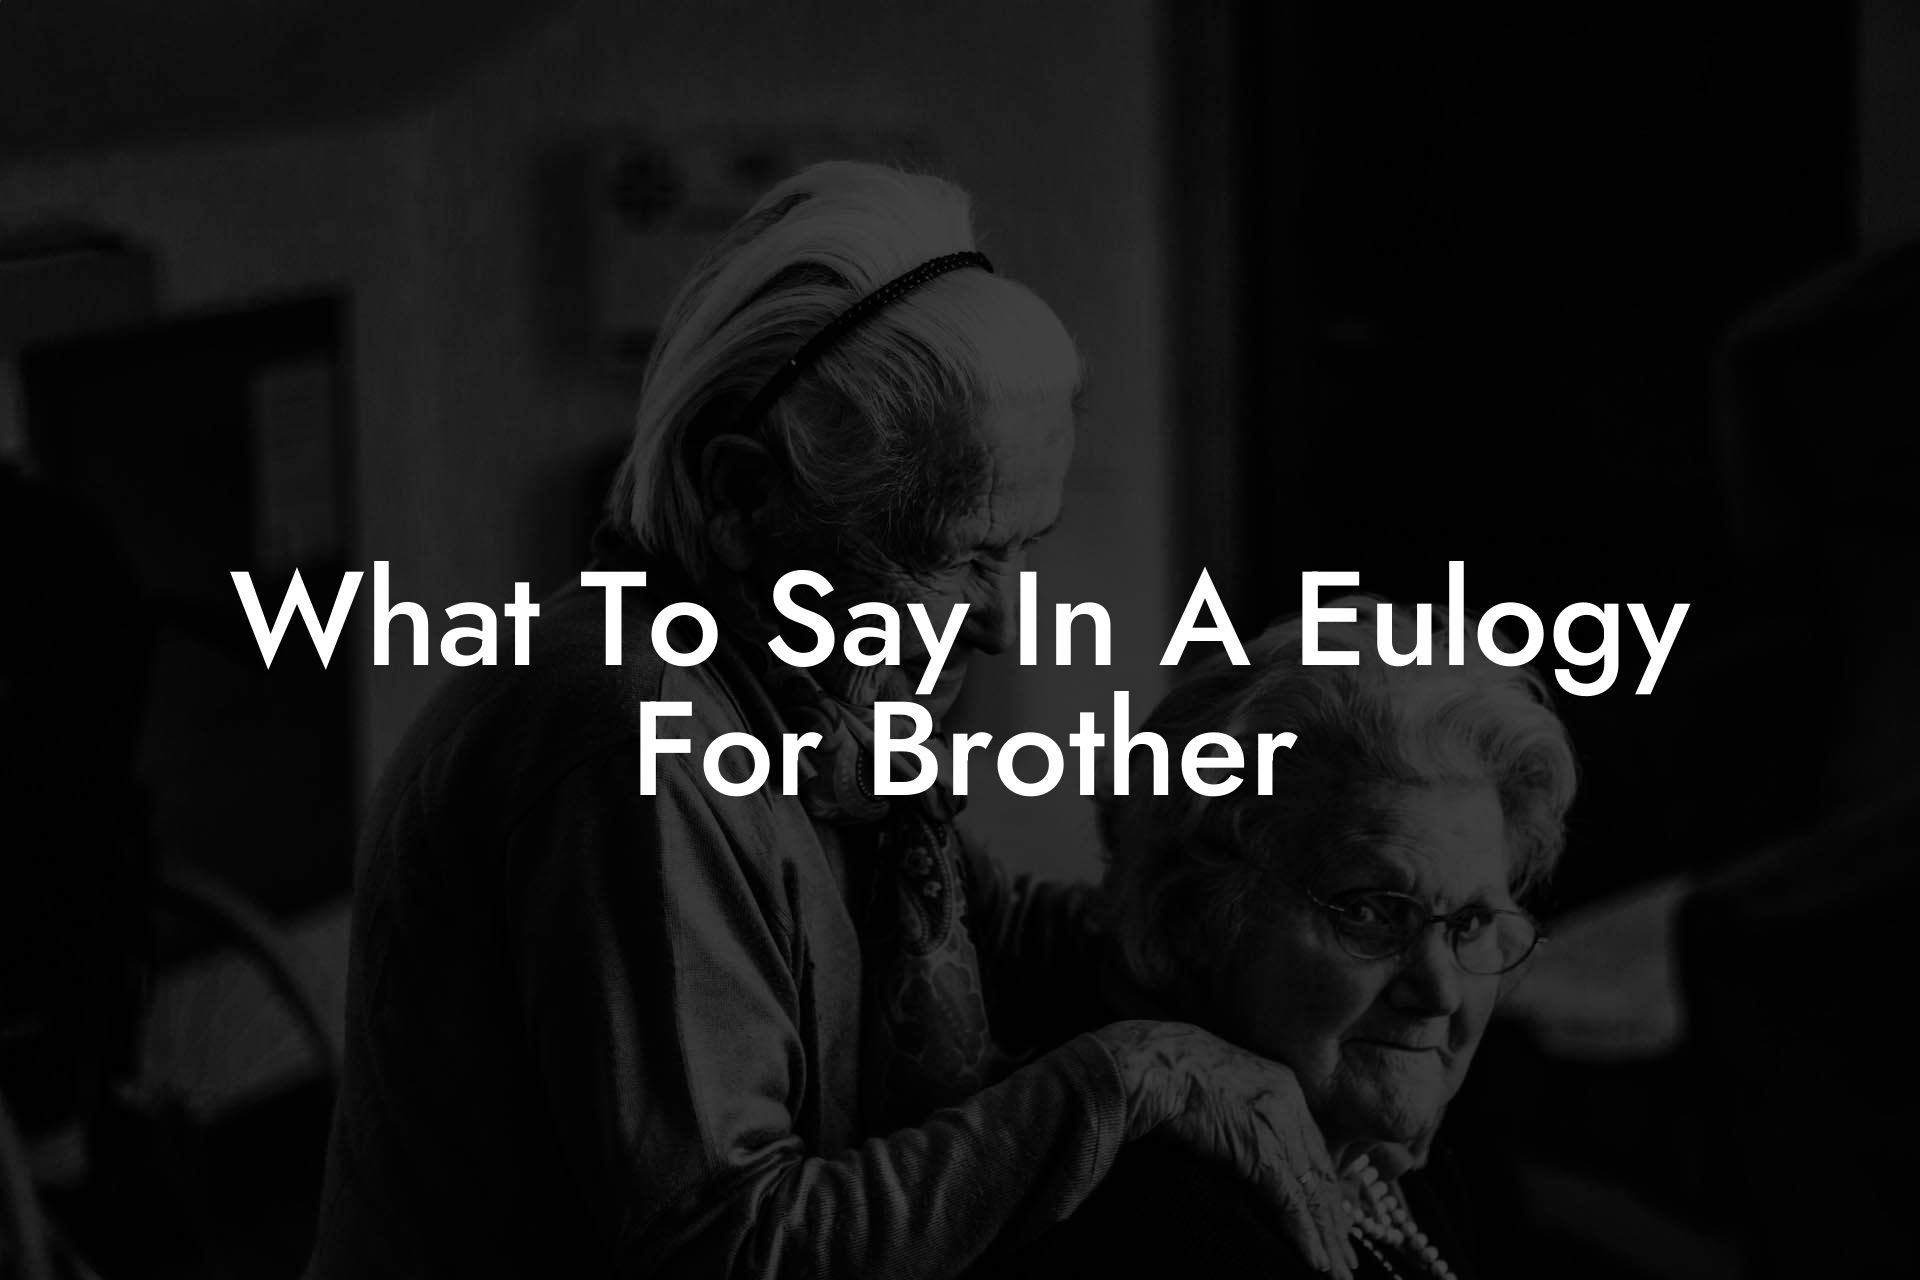 What To Say In A Eulogy For Brother